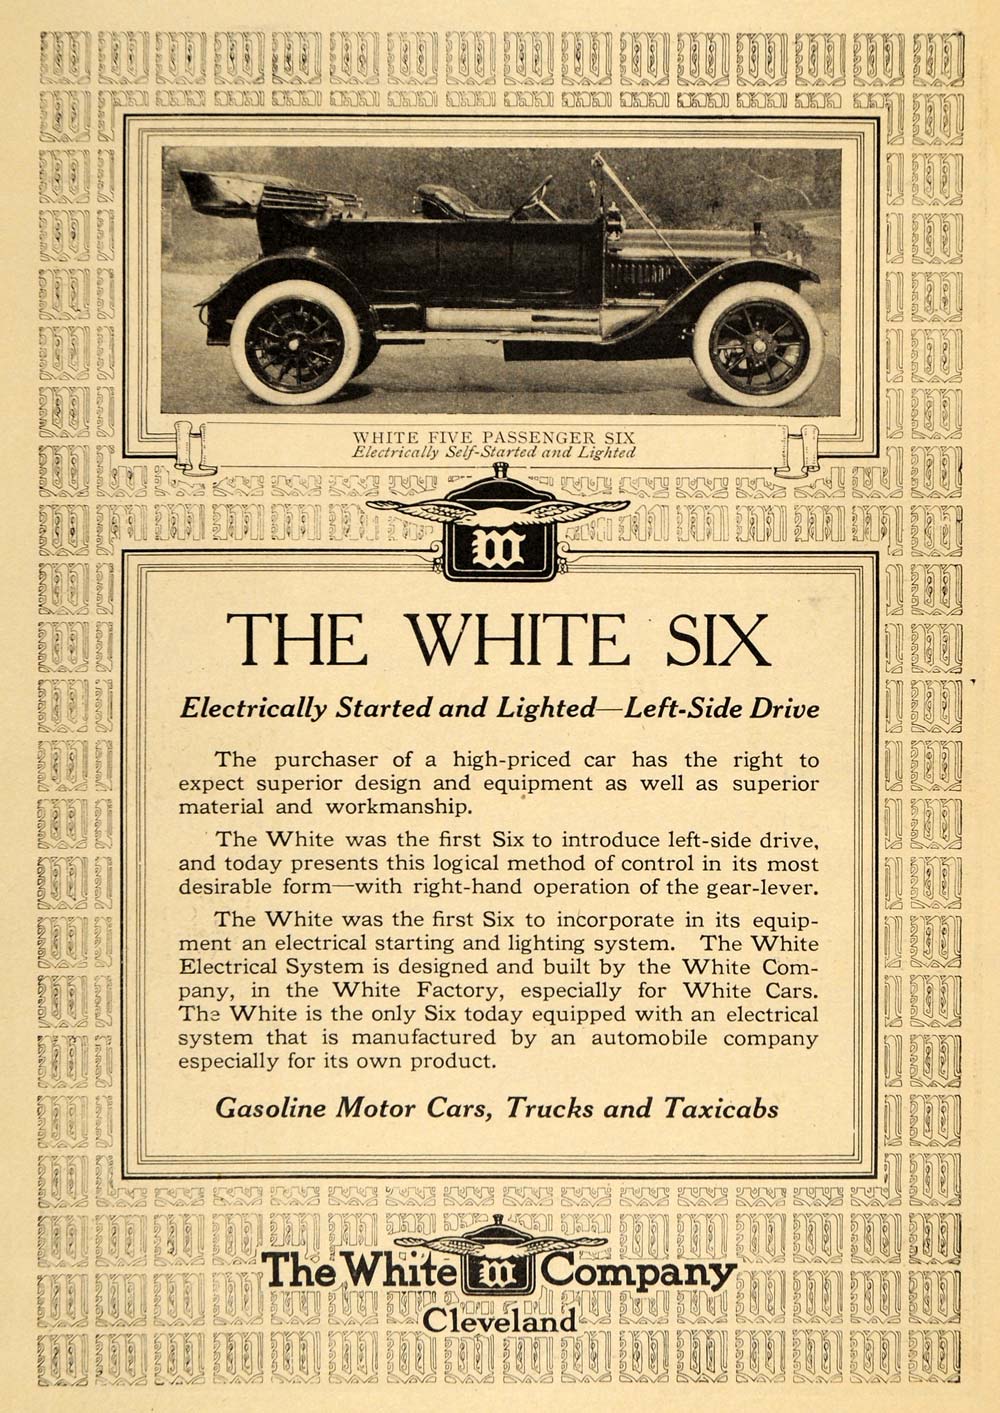 1913 Ad White Five Passenger Six Electrically Started - ORIGINAL ADVERTISING EM1